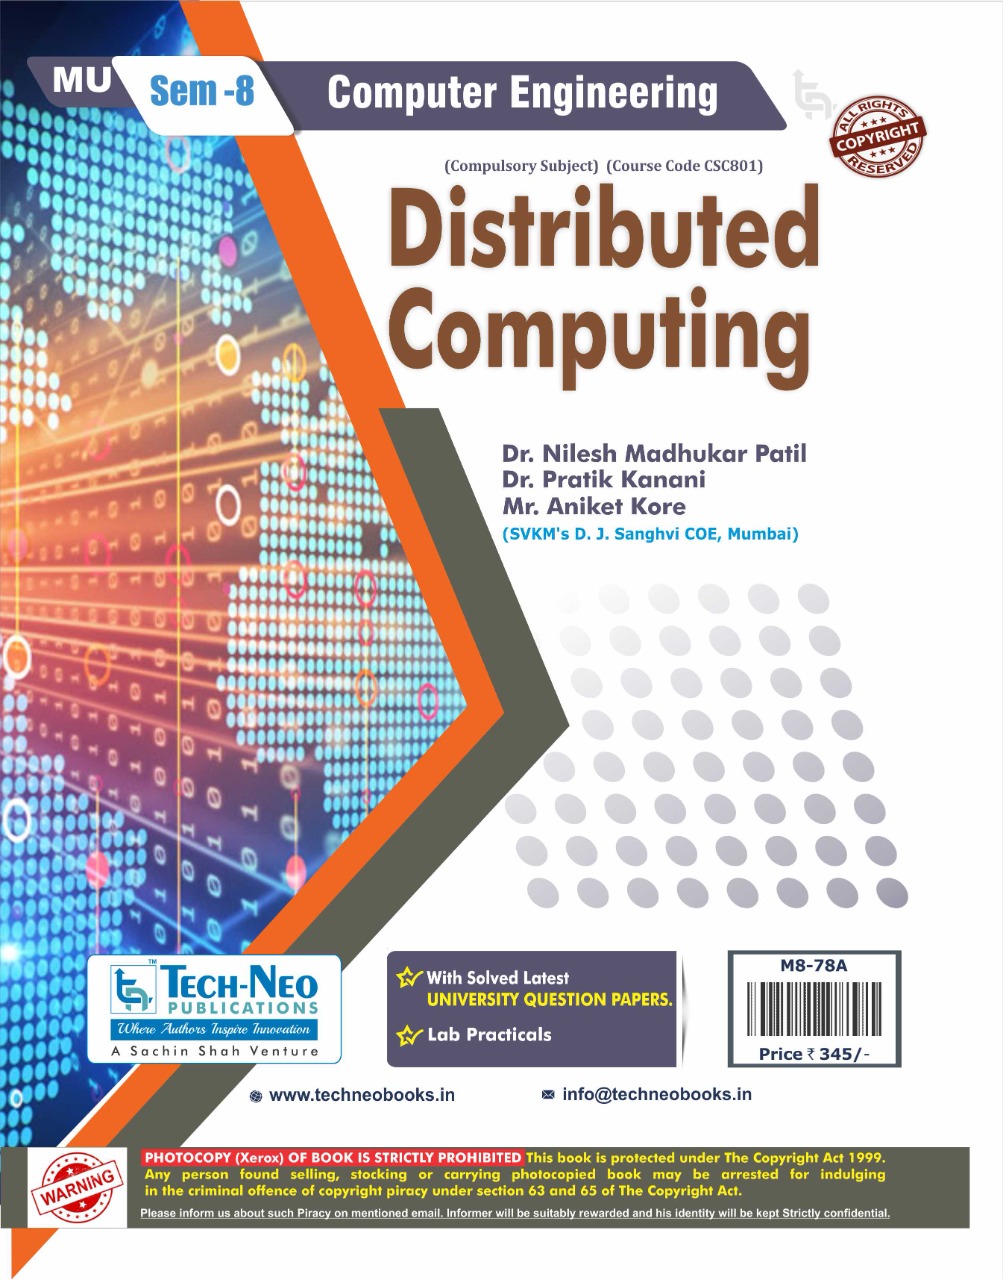 Distributed Comuting